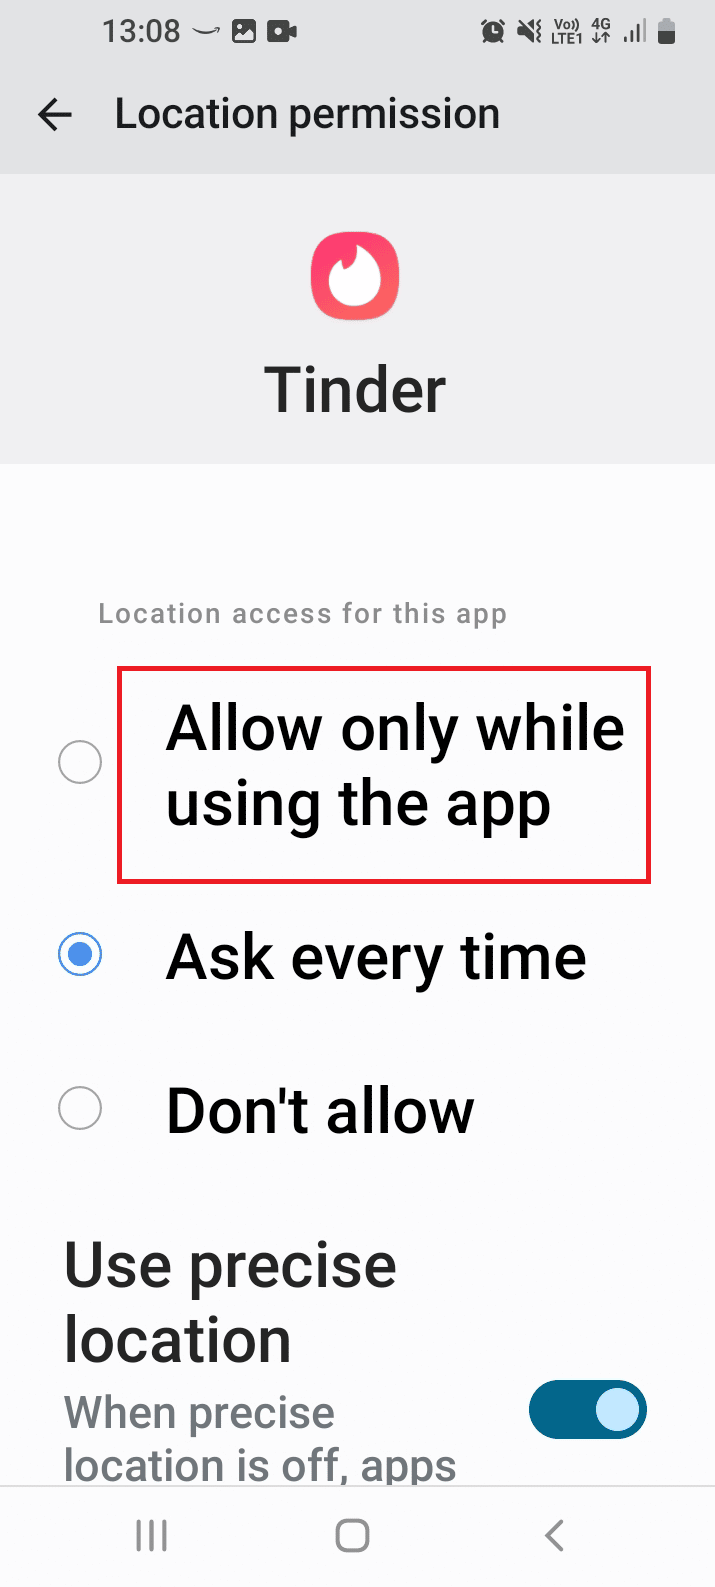 Select the Allow only while using this app option